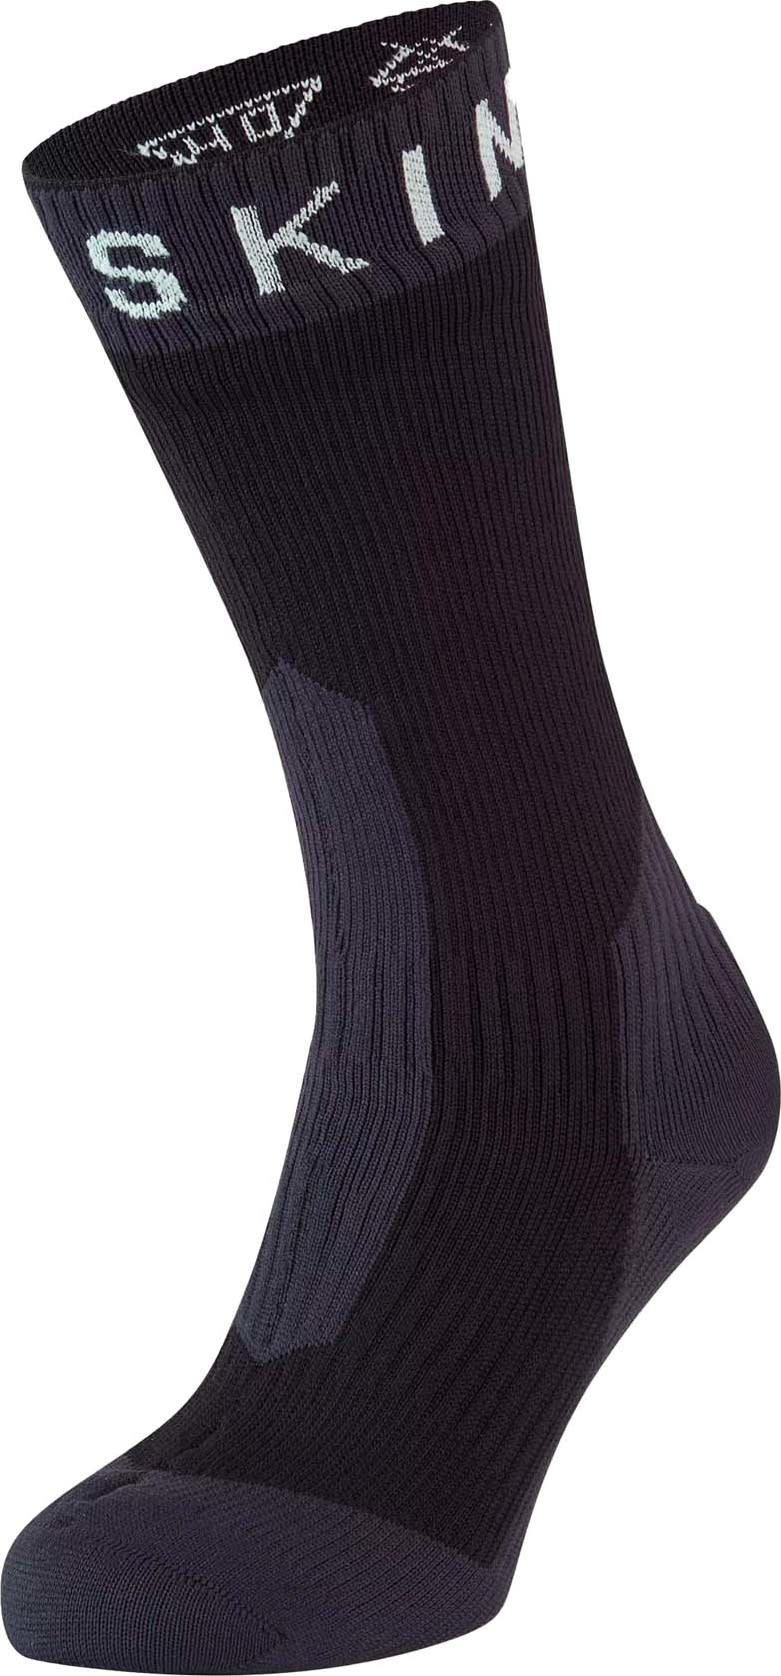 Waterproof Extreme Cold Weather Mid Length Sock Black/Dark Grey/White